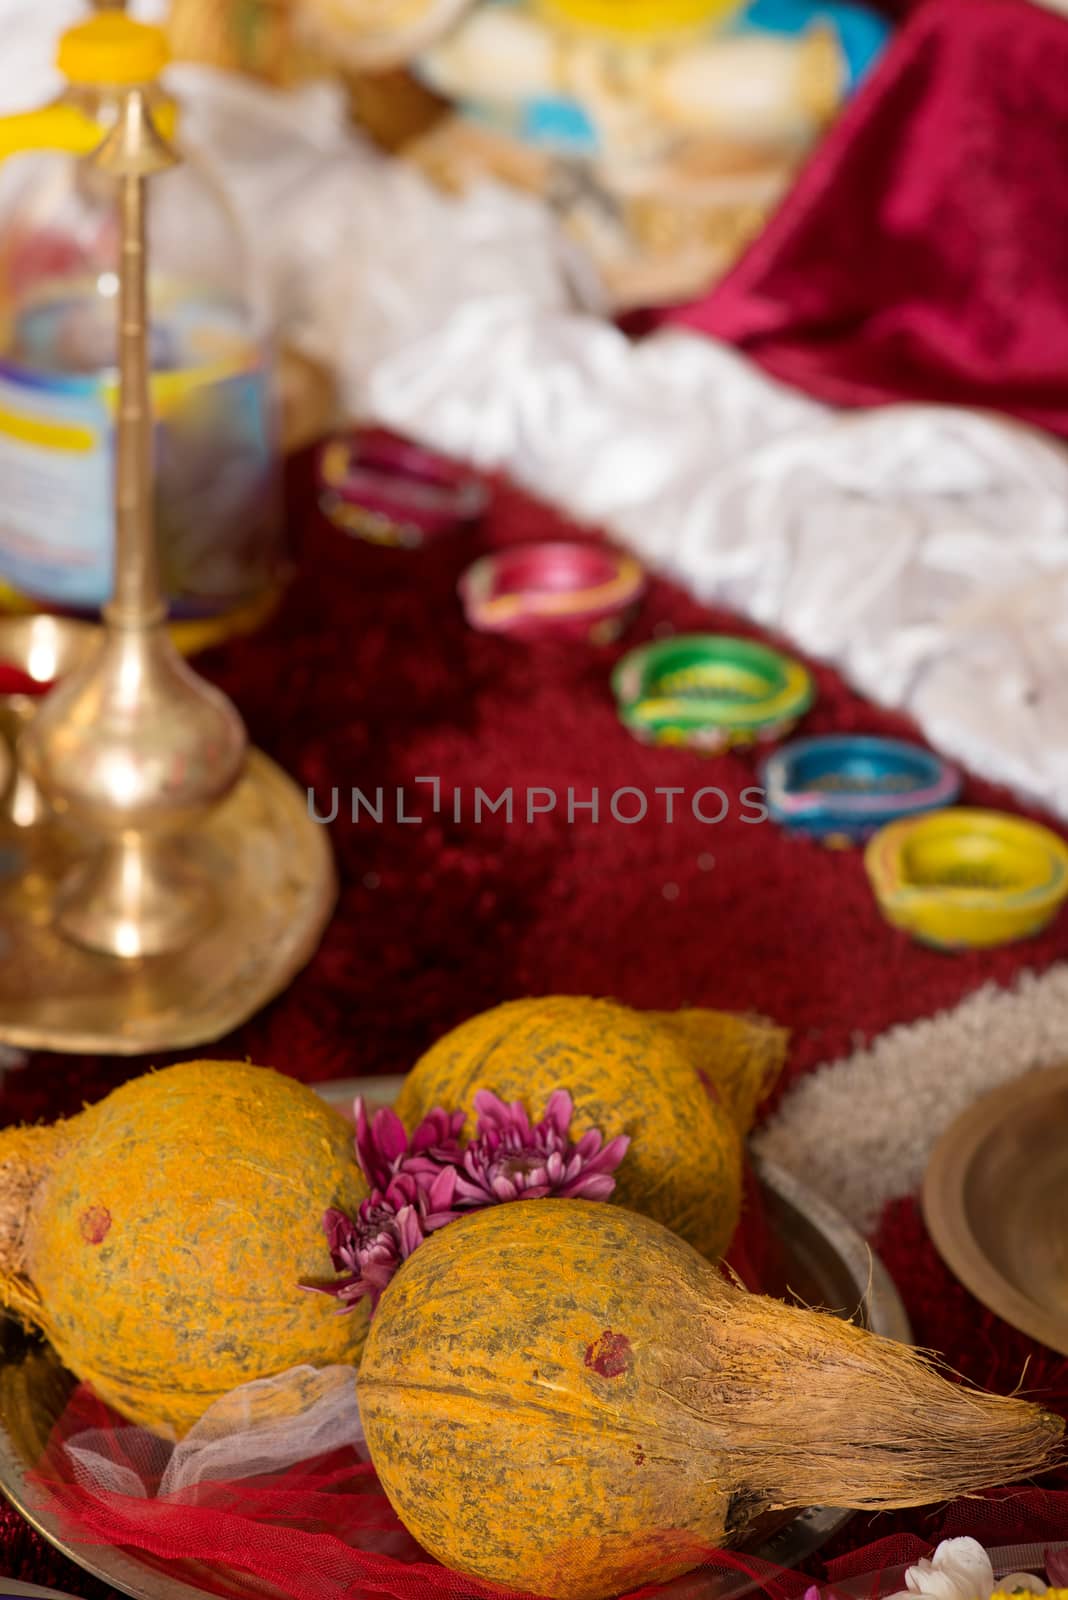 Traditional Indian Hindu religious praying items in ear piercing ceremony for children. Focus on the coconuts.